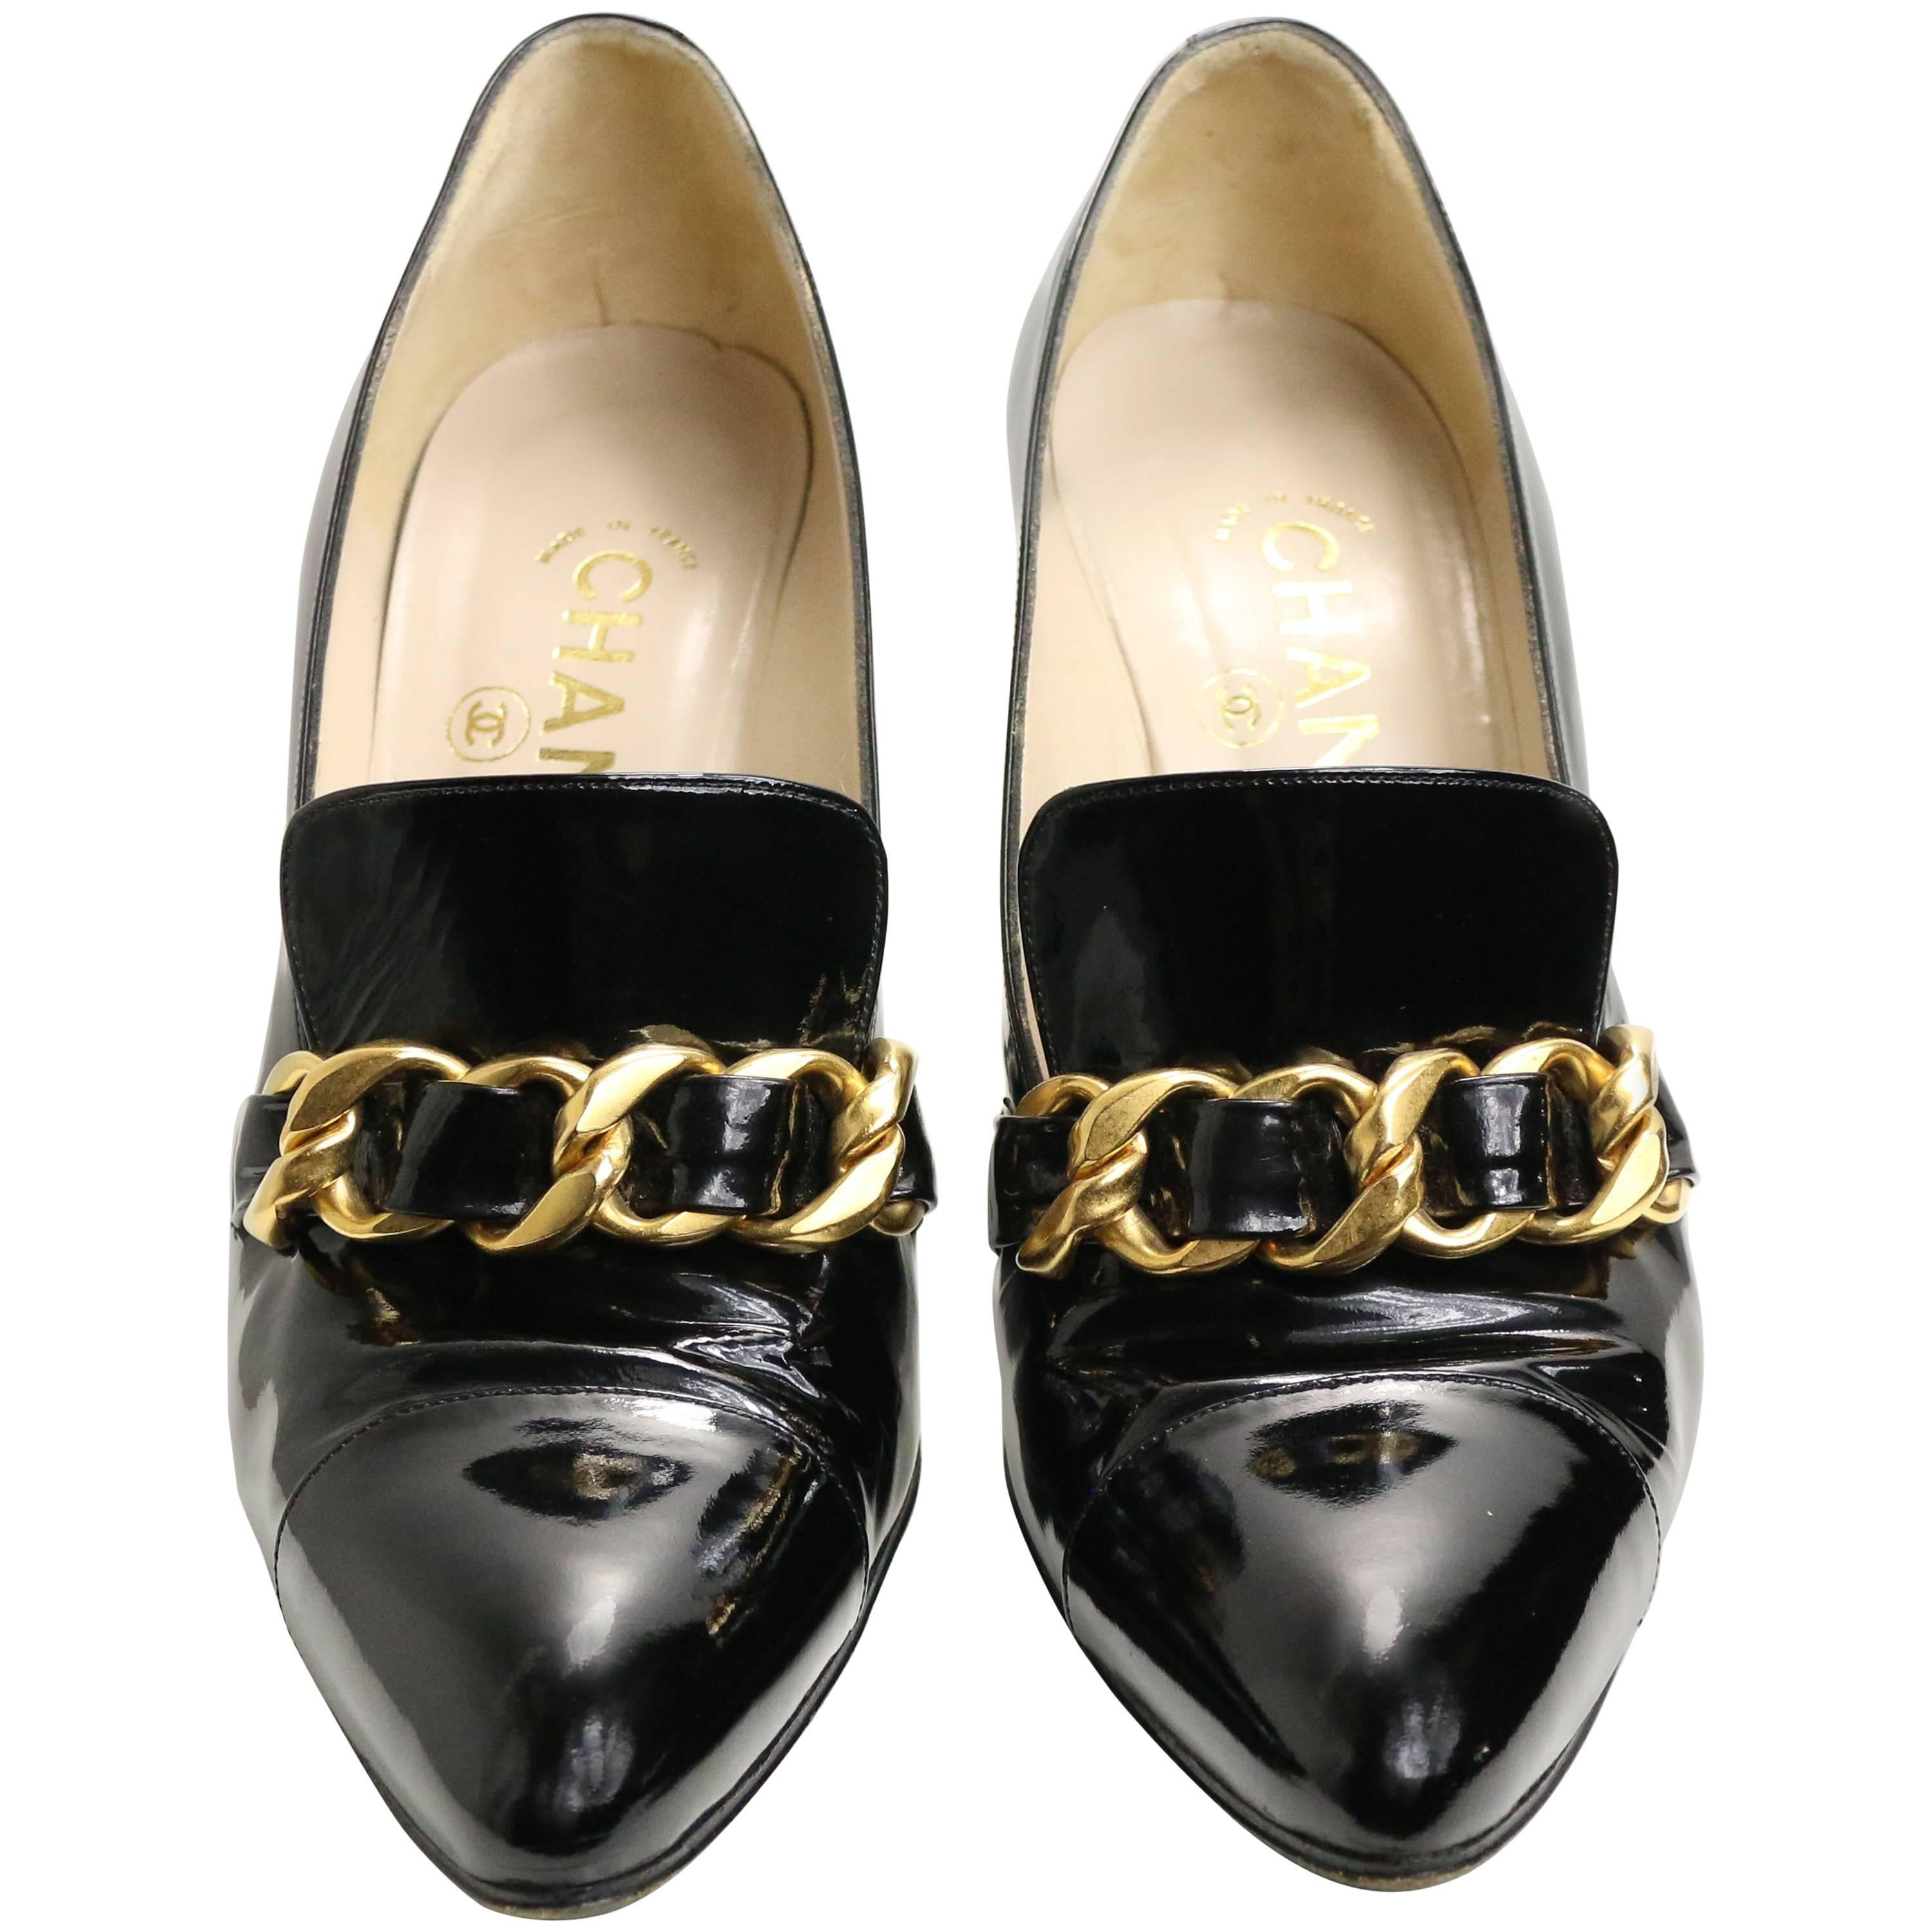 90s Chanel Black Patent Leather Shoes with Gold Braided Pointed Heels